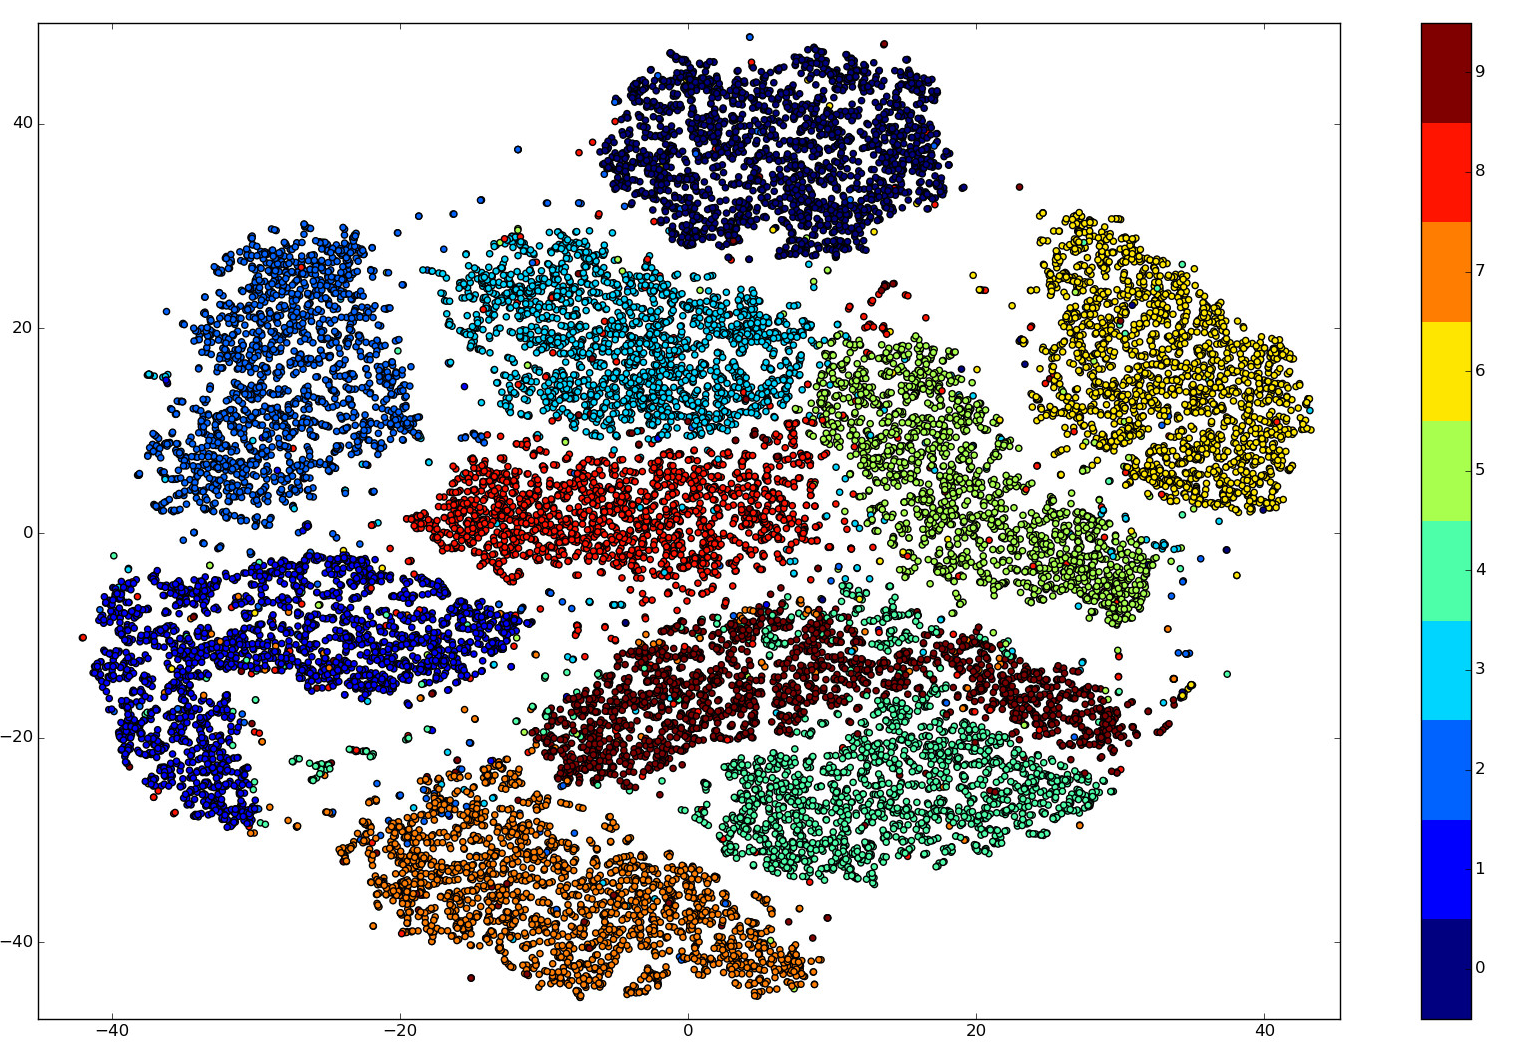 Demonstration of t-SNE producing natural clustering of the images based on their digit.